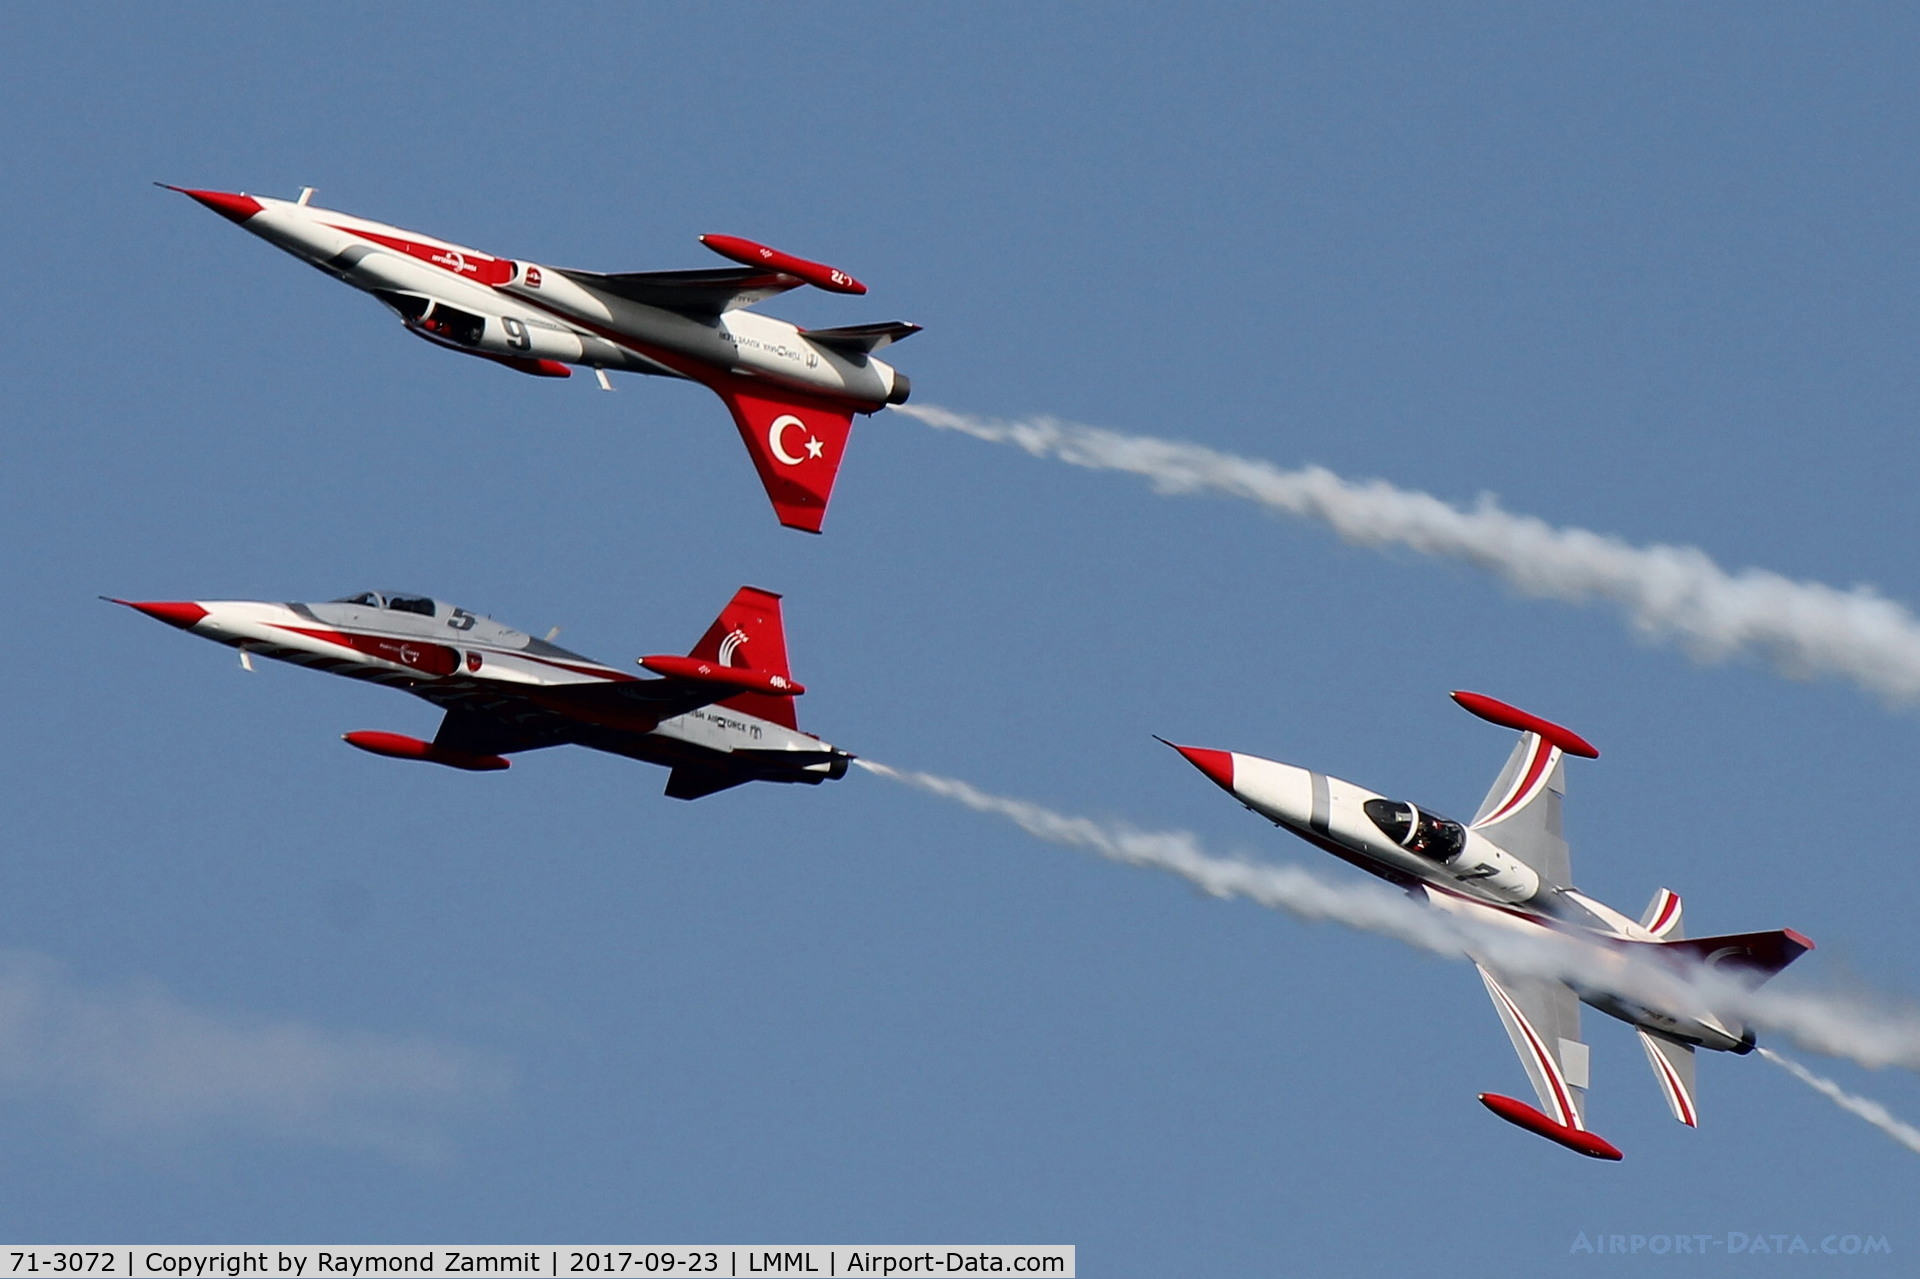 71-3072, Northrop (Canadair) NF-5A-2000 (CL-226) C/N 72, NF-5s of the Turkish Stars Aerobatic Team performing over Malta